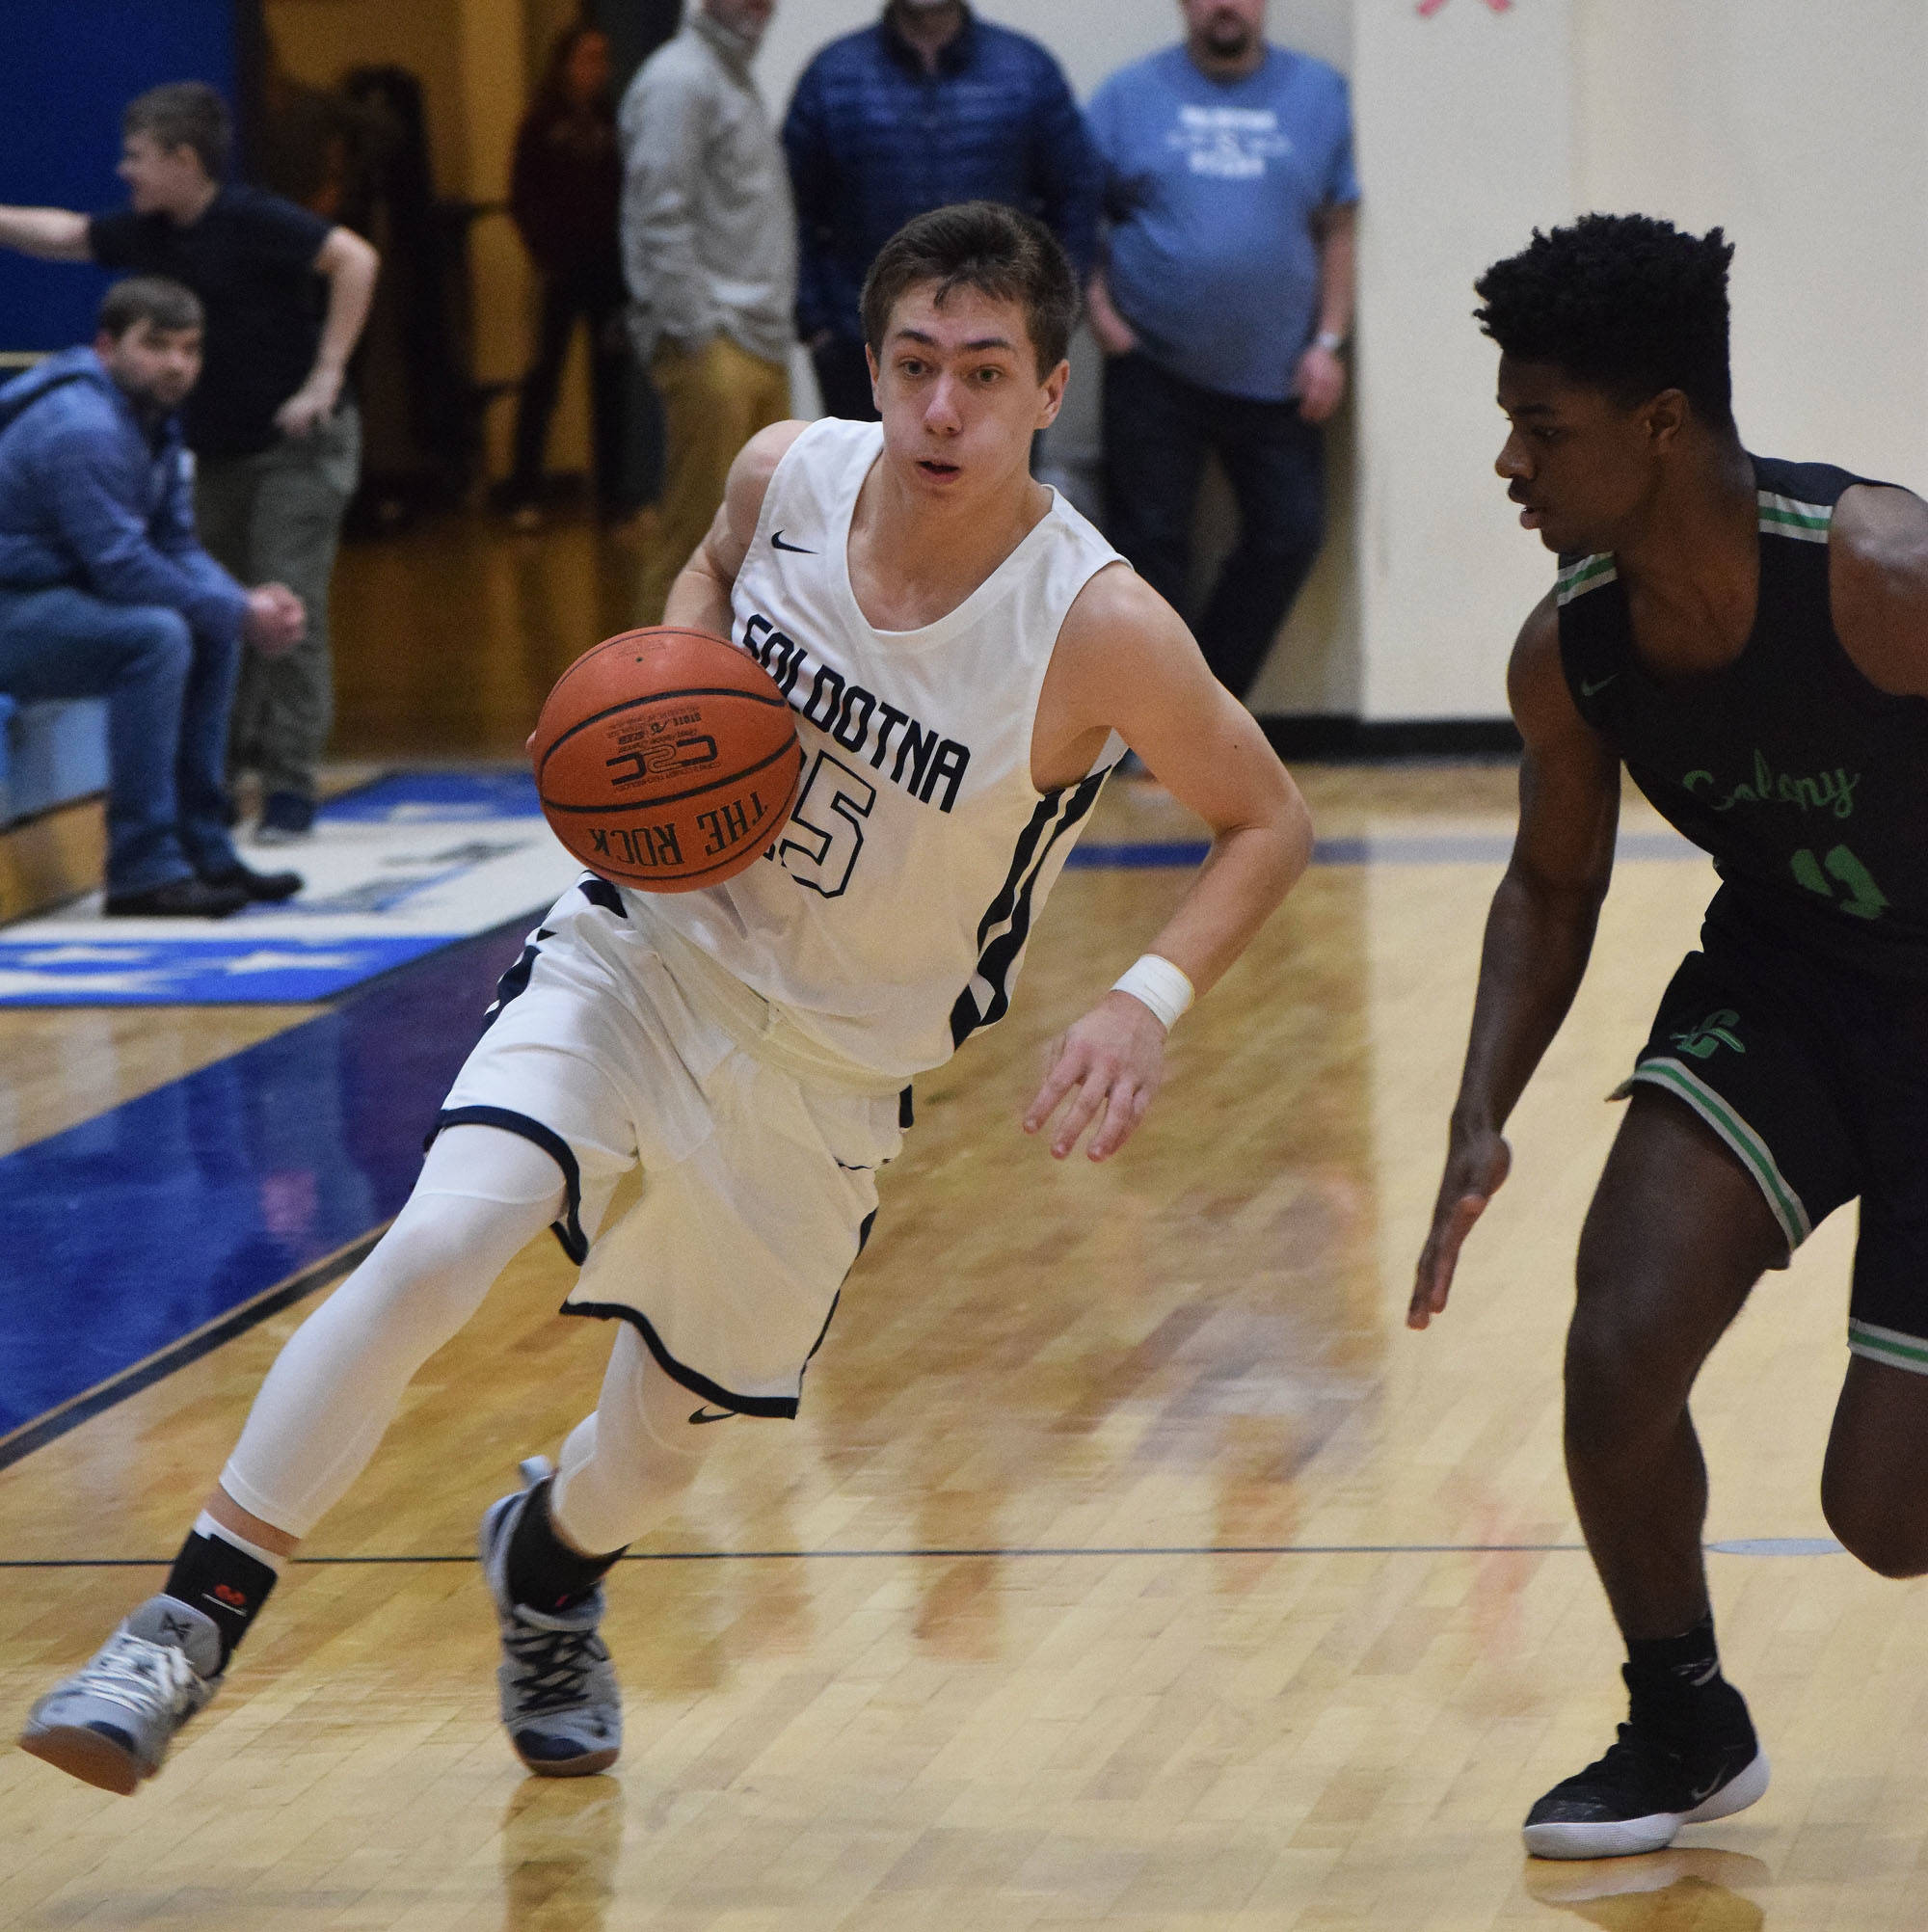 Soldotna’s Jersey Truesdell races by Colony’s Saaren Wright Friday night at Soldotna High School. (Photo by Joey Klecka/Peninsula Clarion)